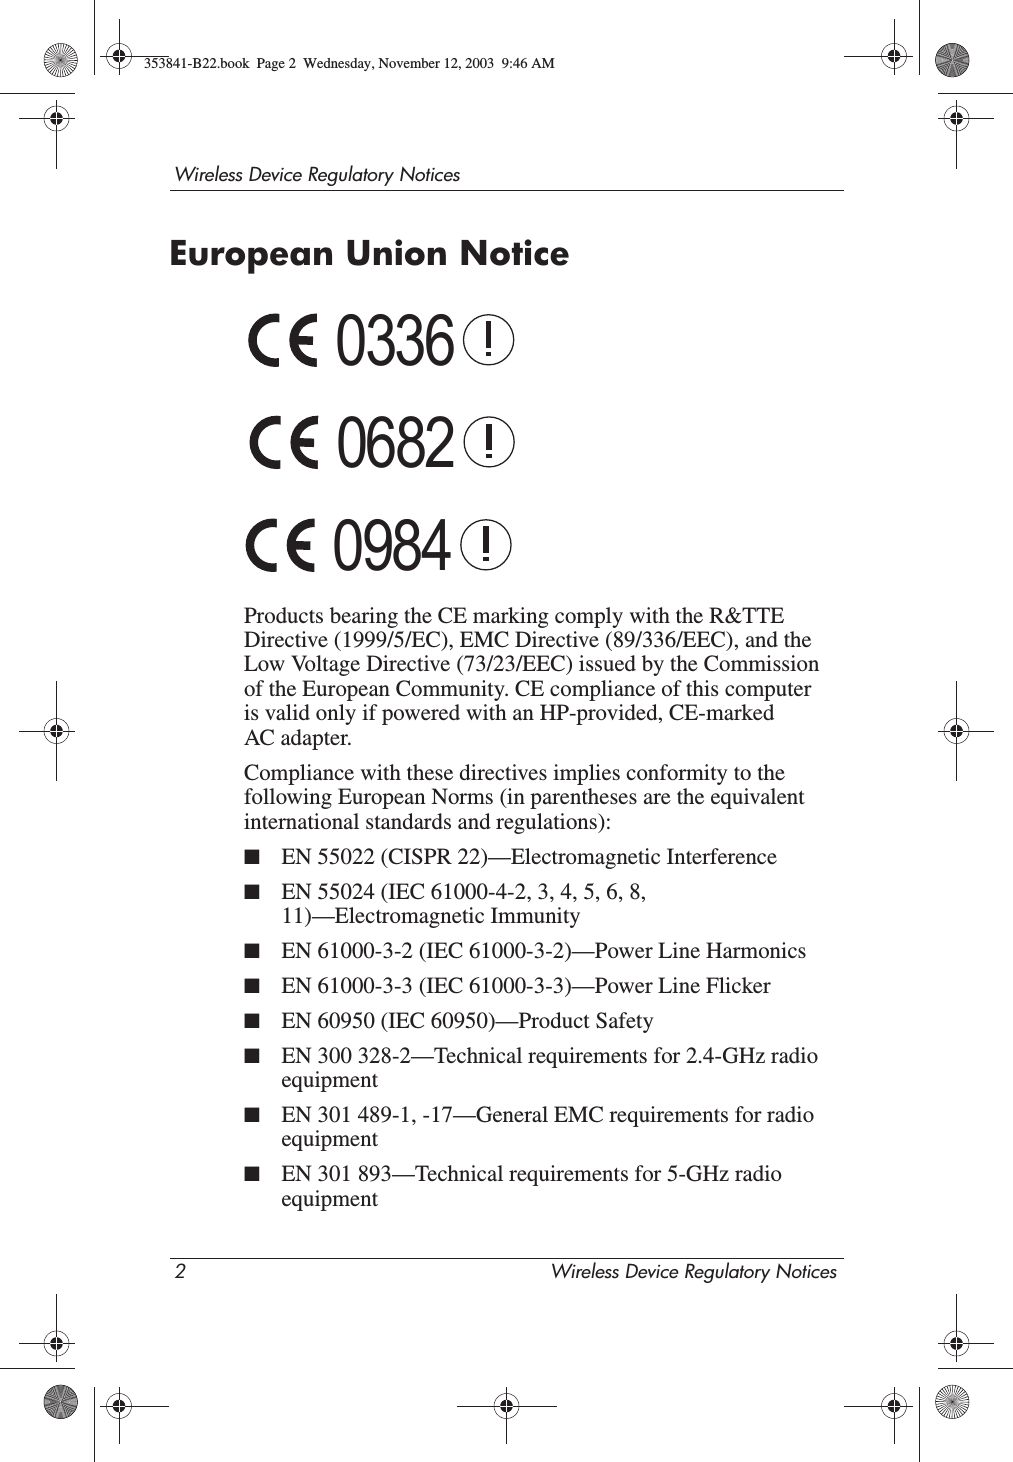 2 Wireless Device Regulatory NoticesWireless Device Regulatory NoticesEuropean Union NoticeProducts bearing the CE marking comply with the R&amp;TTE Directive (1999/5/EC), EMC Directive (89/336/EEC), and the Low Voltage Directive (73/23/EEC) issued by the Commission of the European Community. CE compliance of this computer is valid only if powered with an HP-provided, CE-marked AC adapter. Compliance with these directives implies conformity to the following European Norms (in parentheses are the equivalent international standards and regulations):■EN 55022 (CISPR 22)—Electromagnetic Interference■EN 55024 (IEC 61000-4-2, 3, 4, 5, 6, 8, 11)—Electromagnetic Immunity■EN 61000-3-2 (IEC 61000-3-2)—Power Line Harmonics■EN 61000-3-3 (IEC 61000-3-3)—Power Line Flicker■EN 60950 (IEC 60950)—Product Safety■EN 300 328-2—Technical requirements for 2.4-GHz radio equipment■EN 301 489-1, -17—General EMC requirements for radio equipment■EN 301 893—Technical requirements for 5-GHz radio equipment033606820984353841-B22.book  Page 2  Wednesday, November 12, 2003  9:46 AM